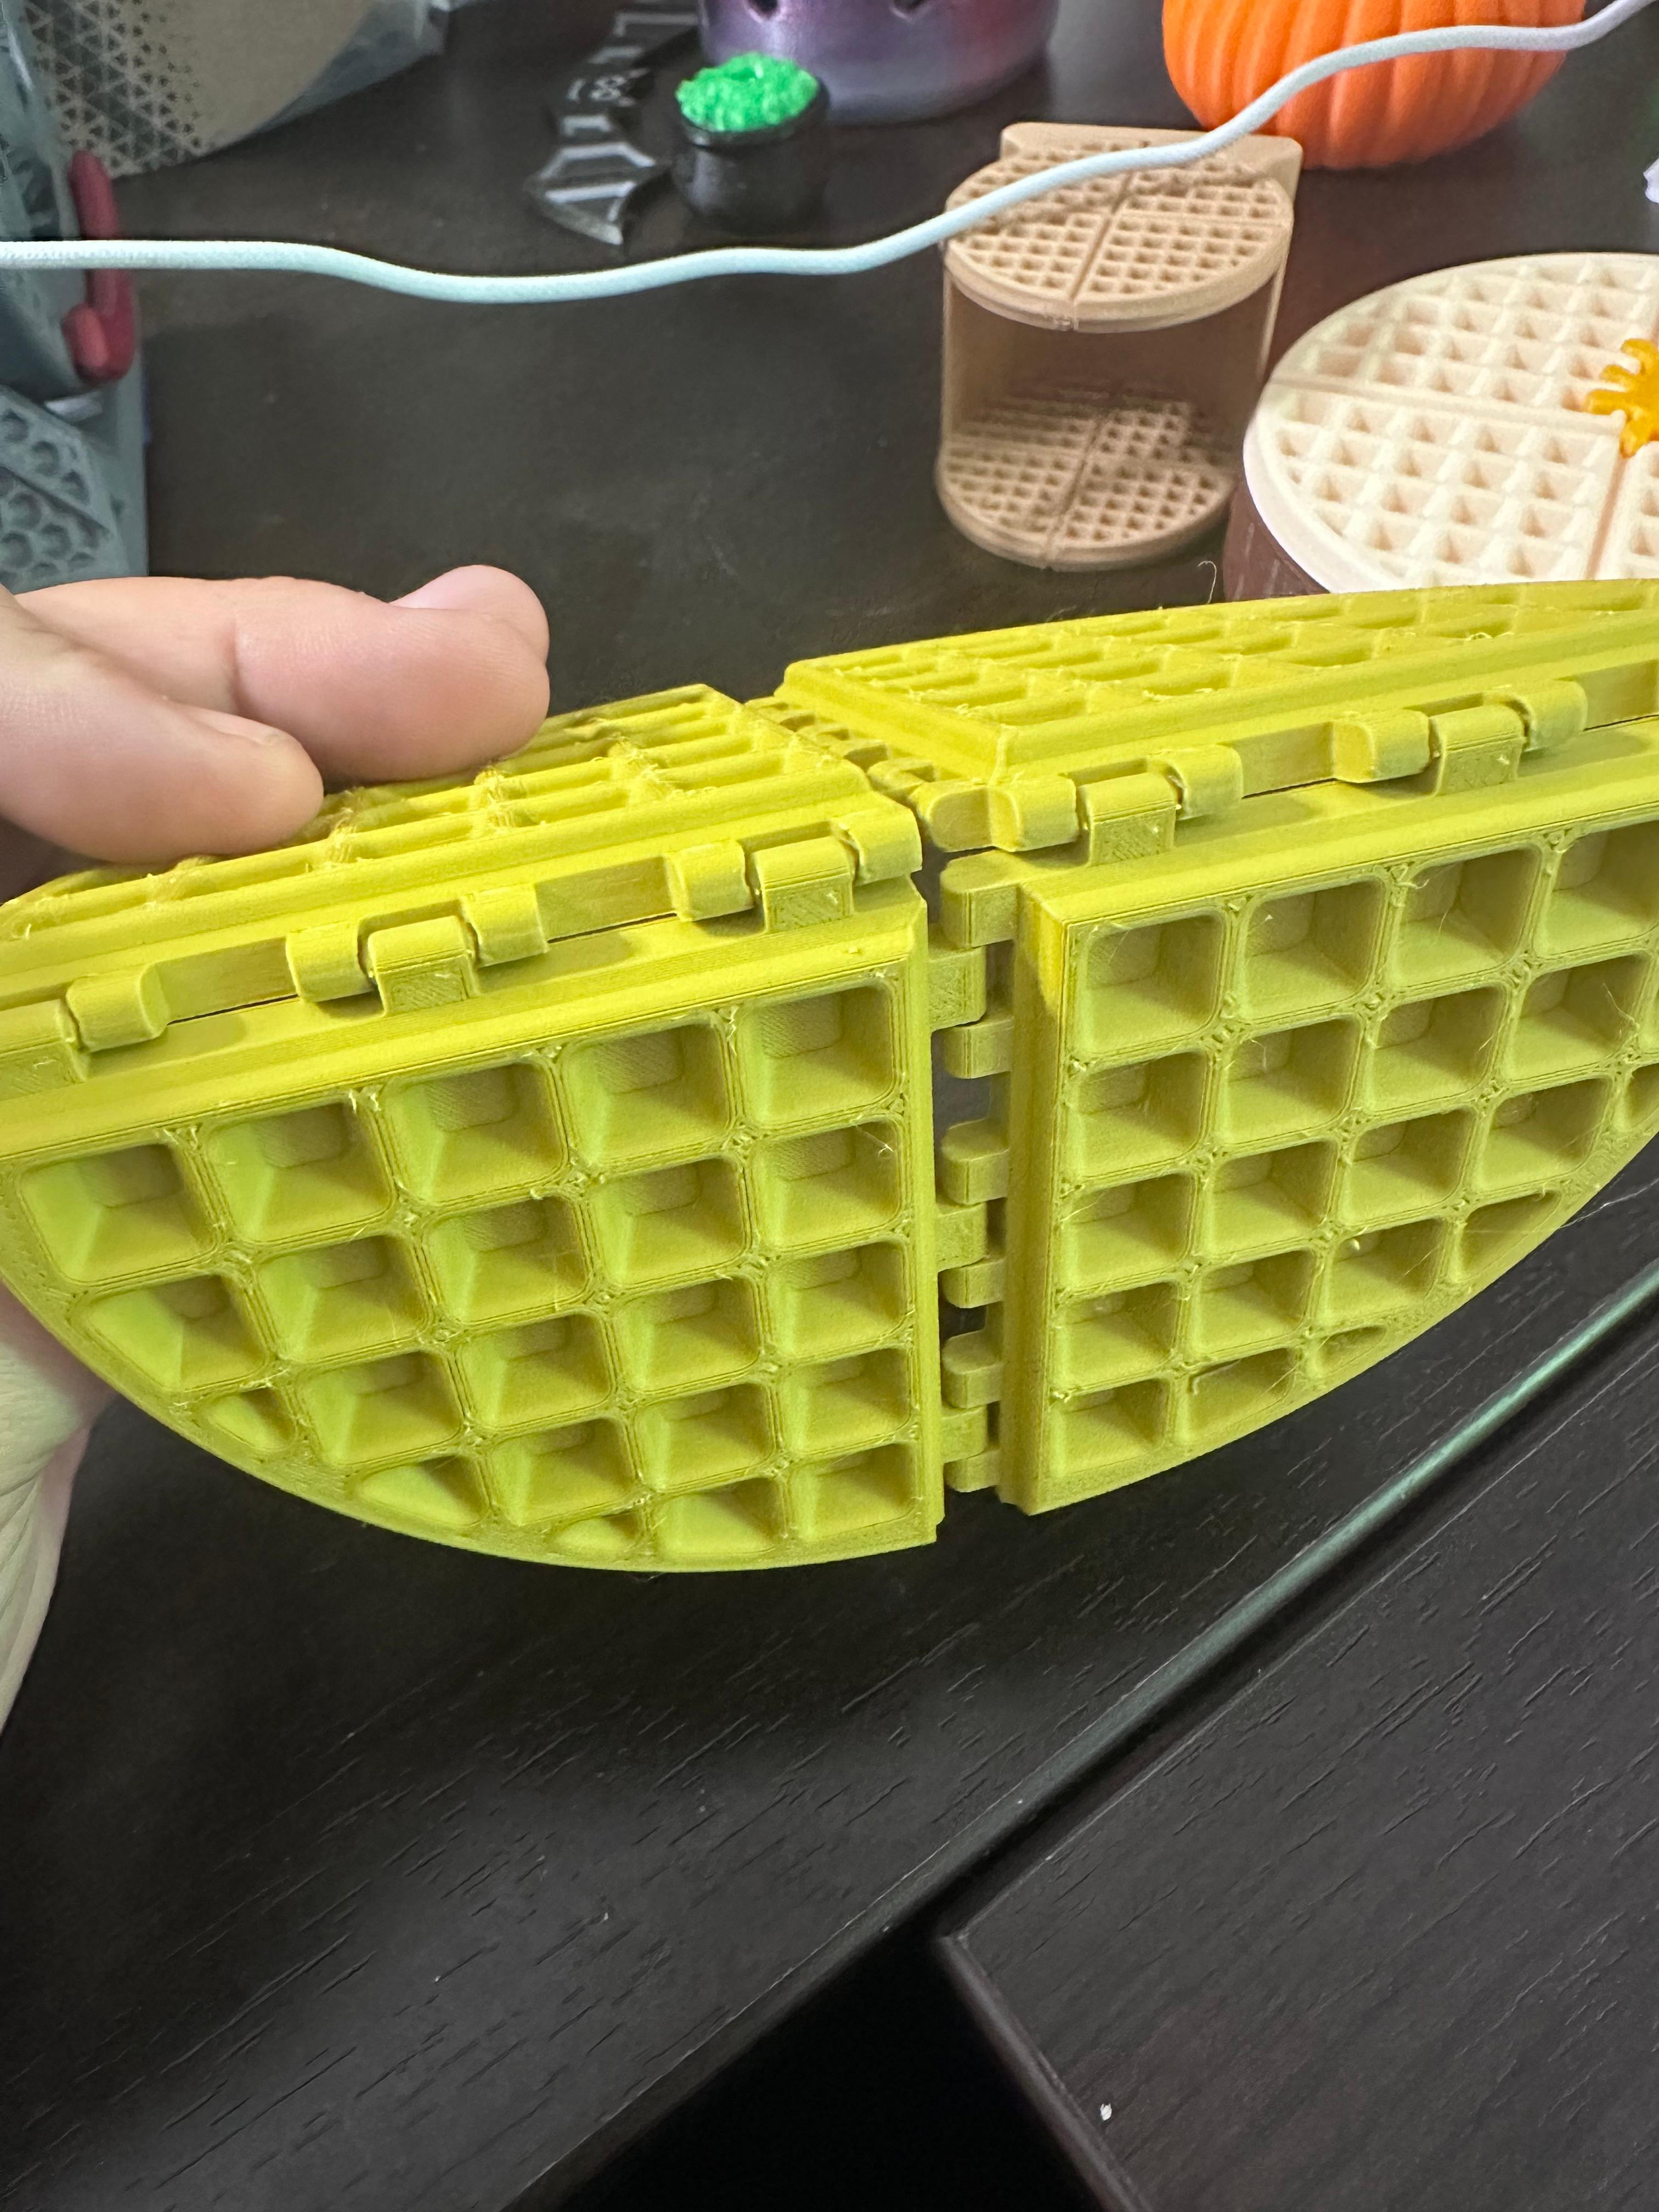 Articulating Waffle with Butter 3d model